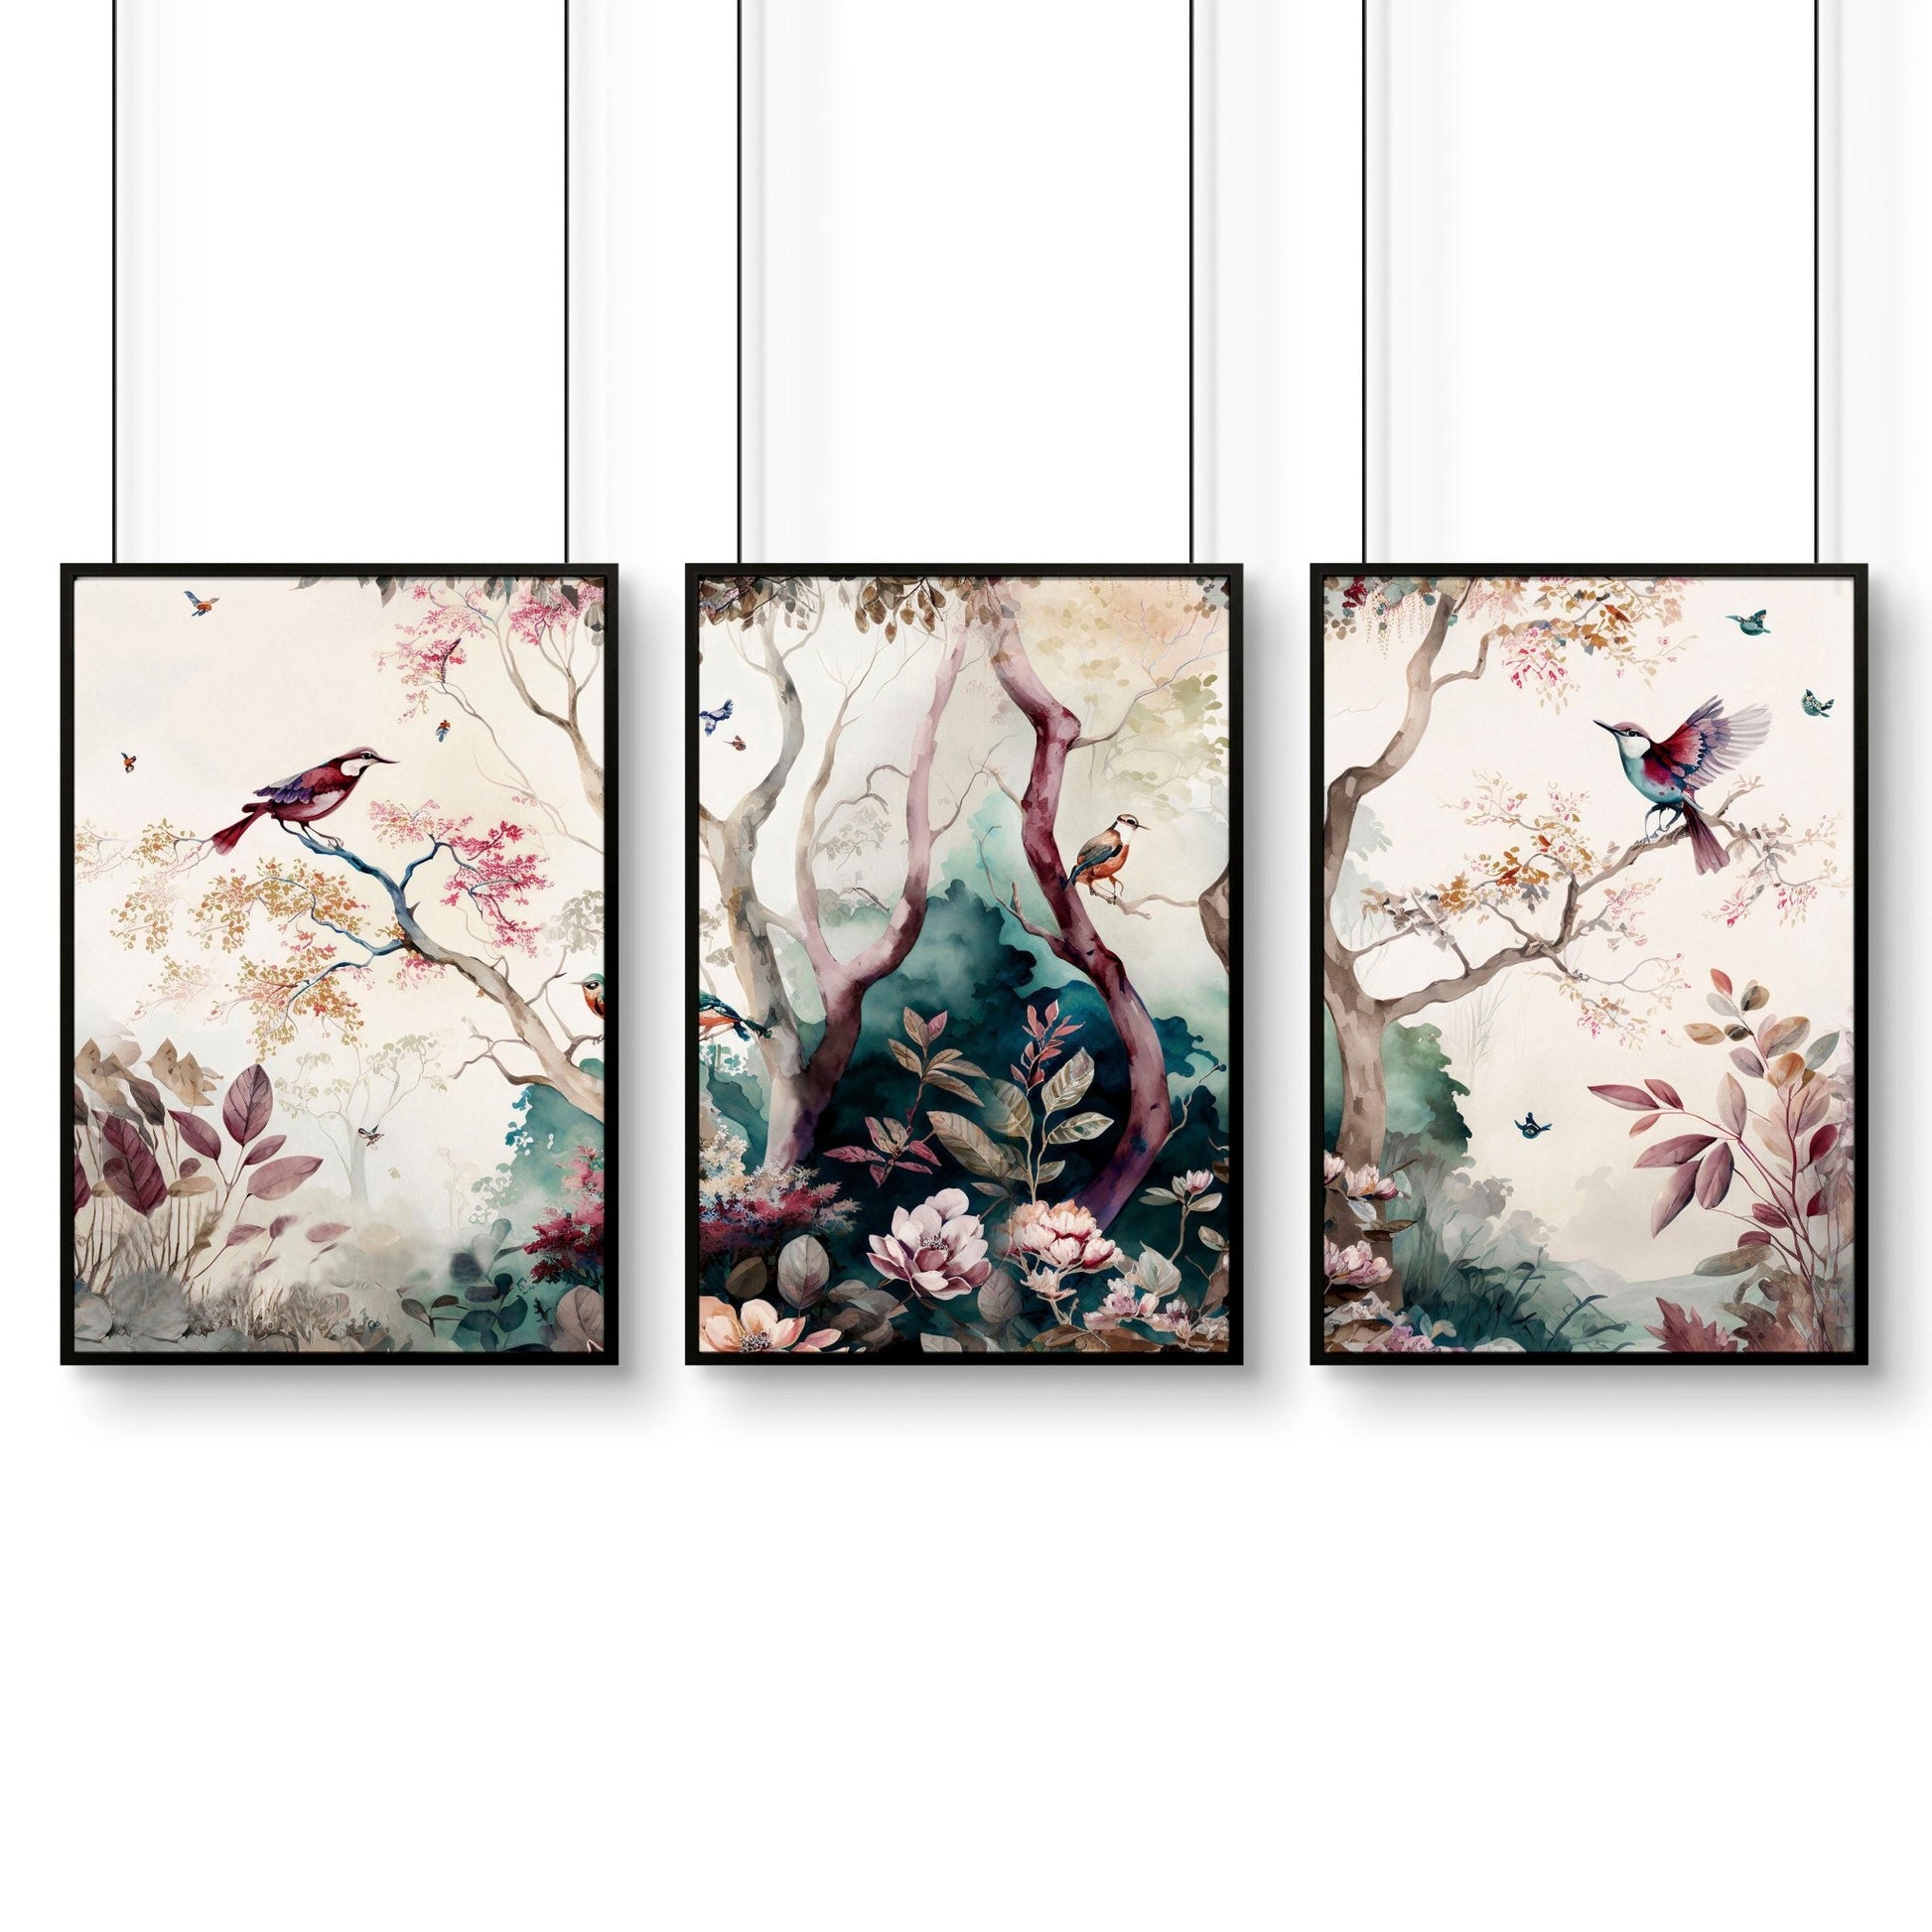 Wall art for living rooms | set of 3 wall art prints - About Wall Art